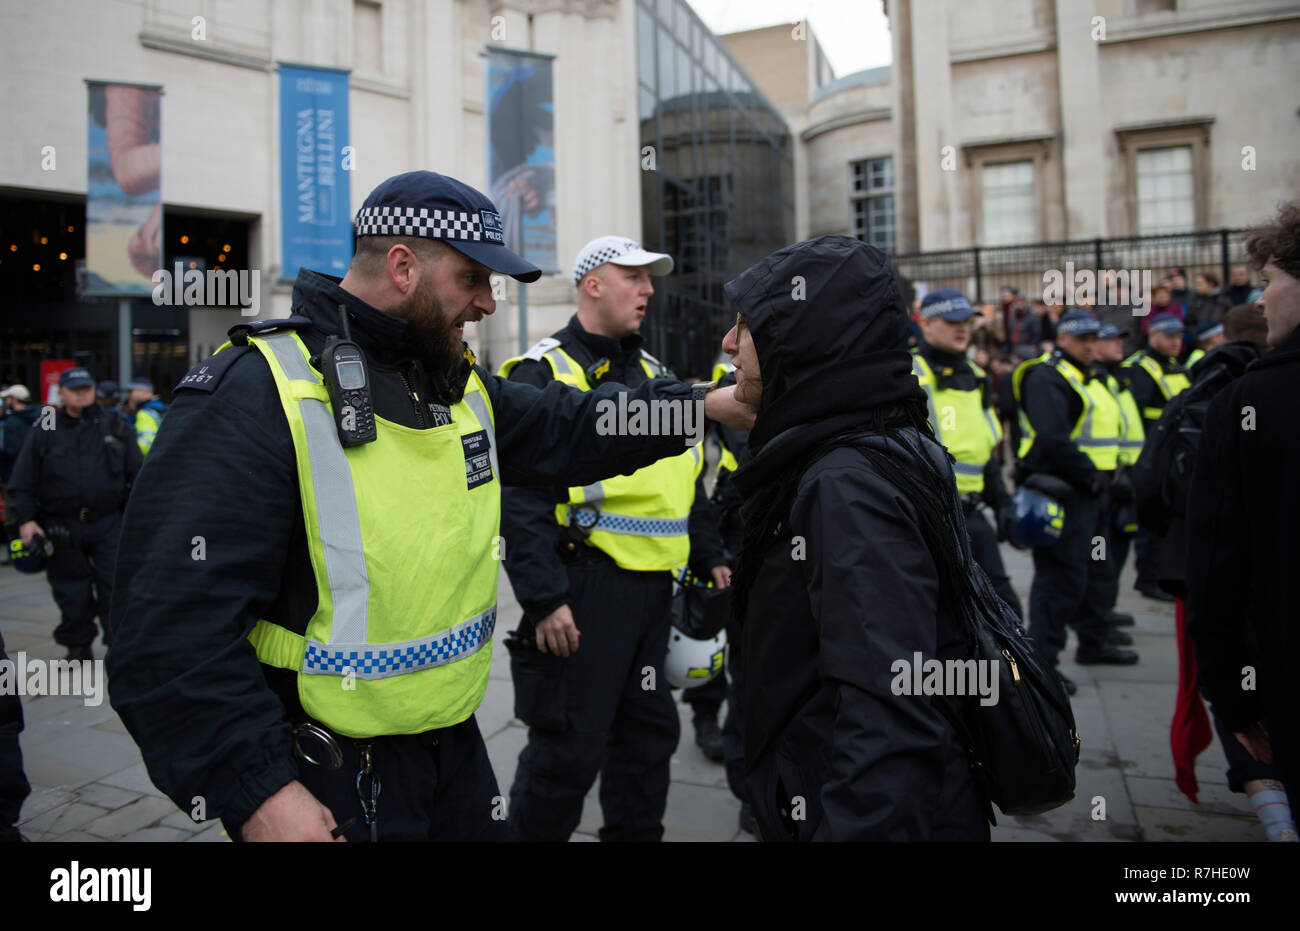 Police officer arguing with a protester during the demonstration against the 'Brexit Betrayal March'.  Thousands of people took to the streets in central London to march against the 'Brexit Betrayal March' organised by Tommy Robinson and UKIP. Counter Protesters made their way from Portland Place to Whitehall, where speakers addressed the crowd. During the counter demonstration, there was a strong police presence. A group of counter protesters, who became separated from the main protest, were corralled by police to avoid an encounter with a group of Tommy Robinson / UKIP supporters. Stock Photo